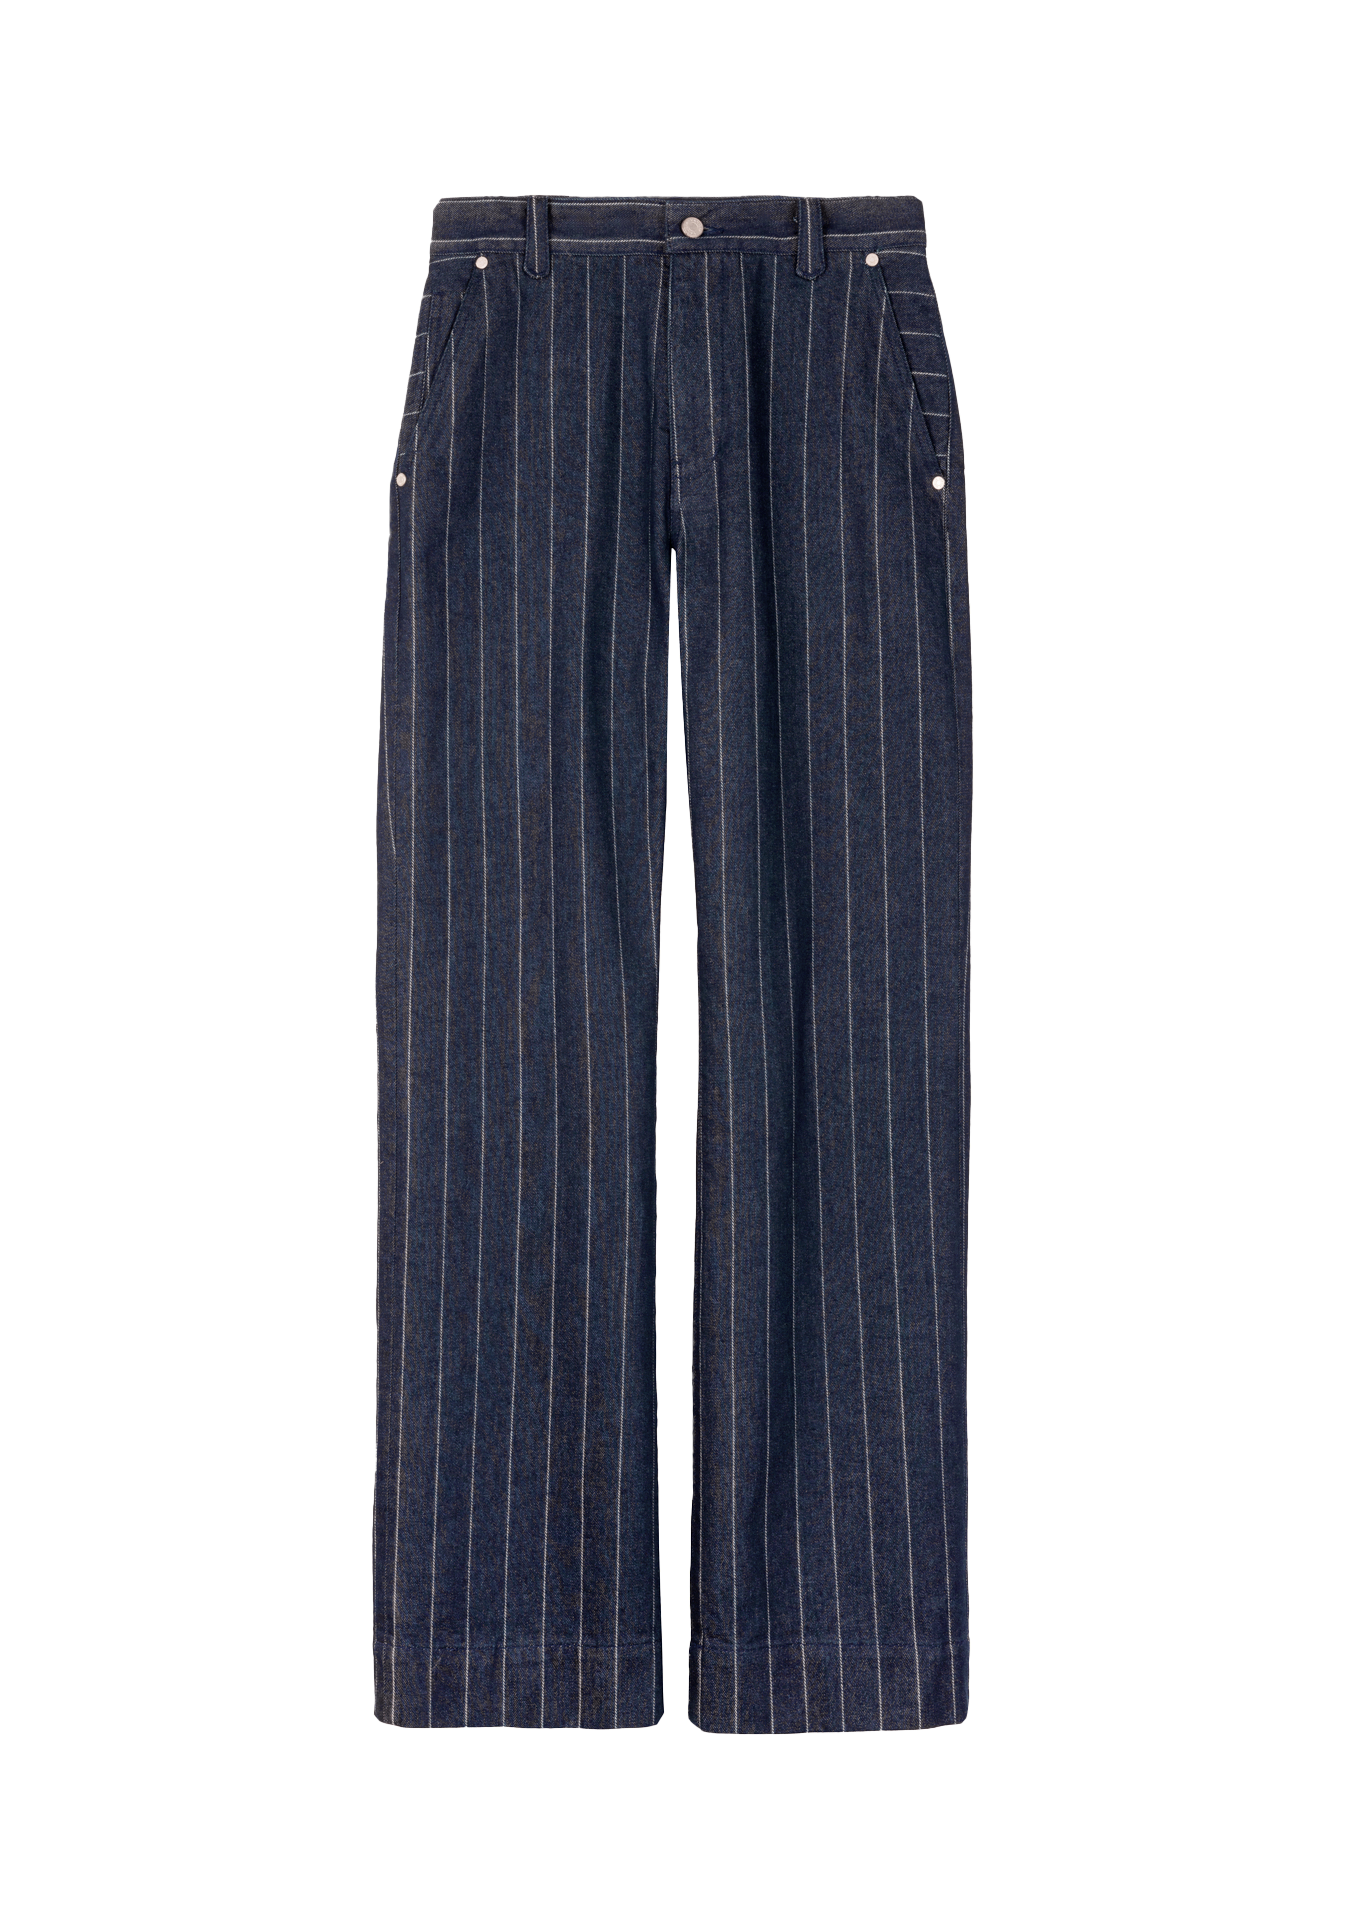 Pinstriped bootcut jeans